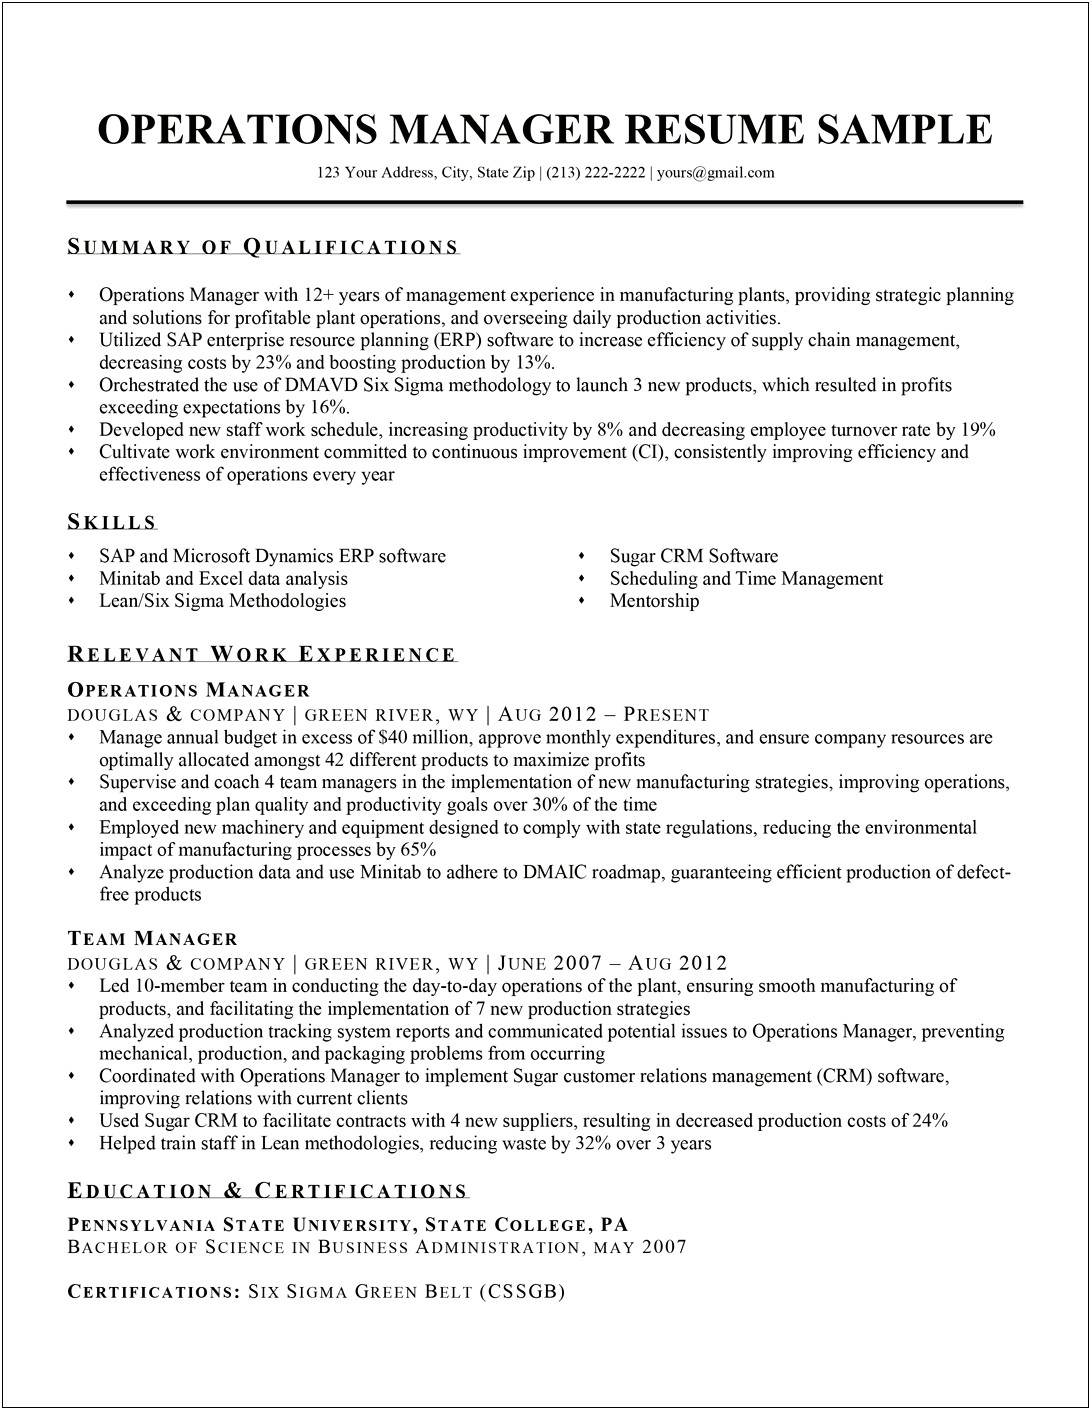 Sample Resume For Experienced Operations Manager